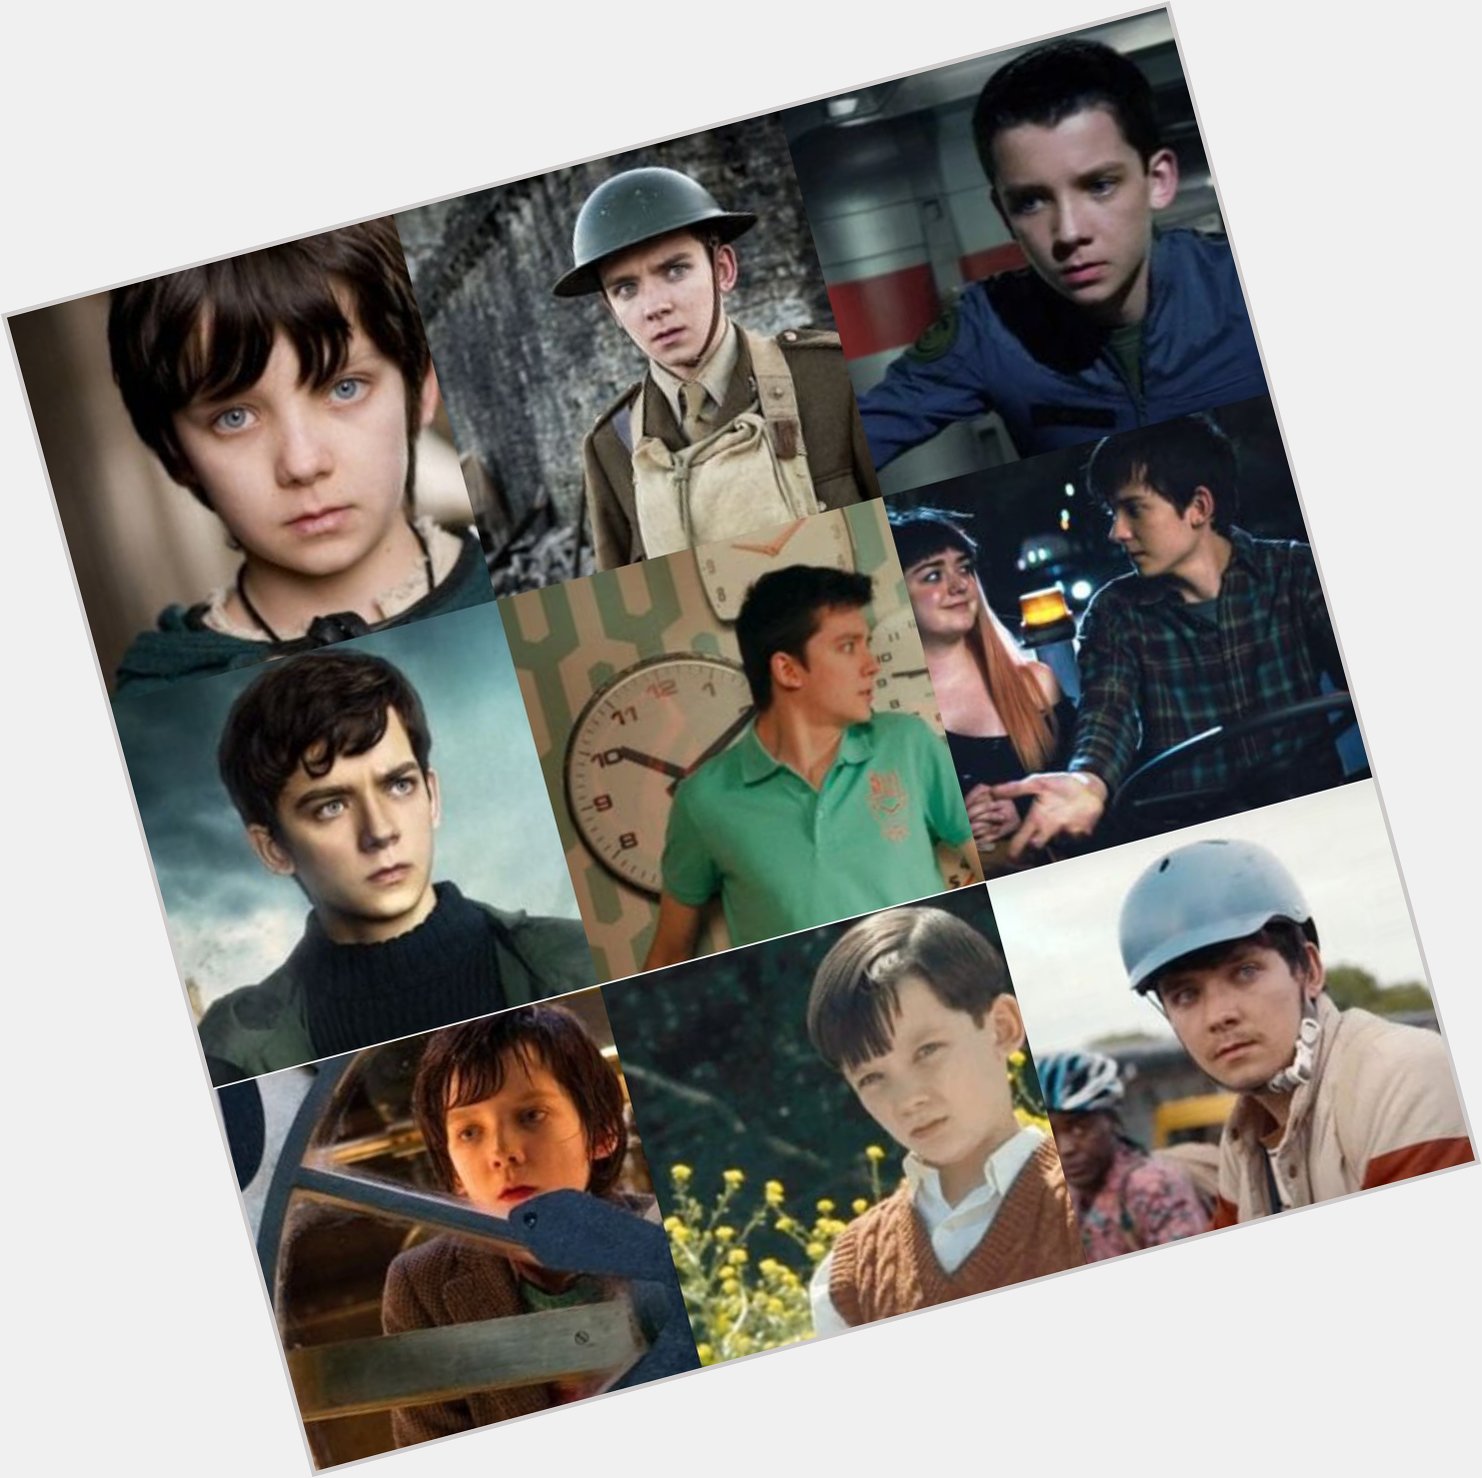 Happy 25th birthday to Asa Butterfield! 